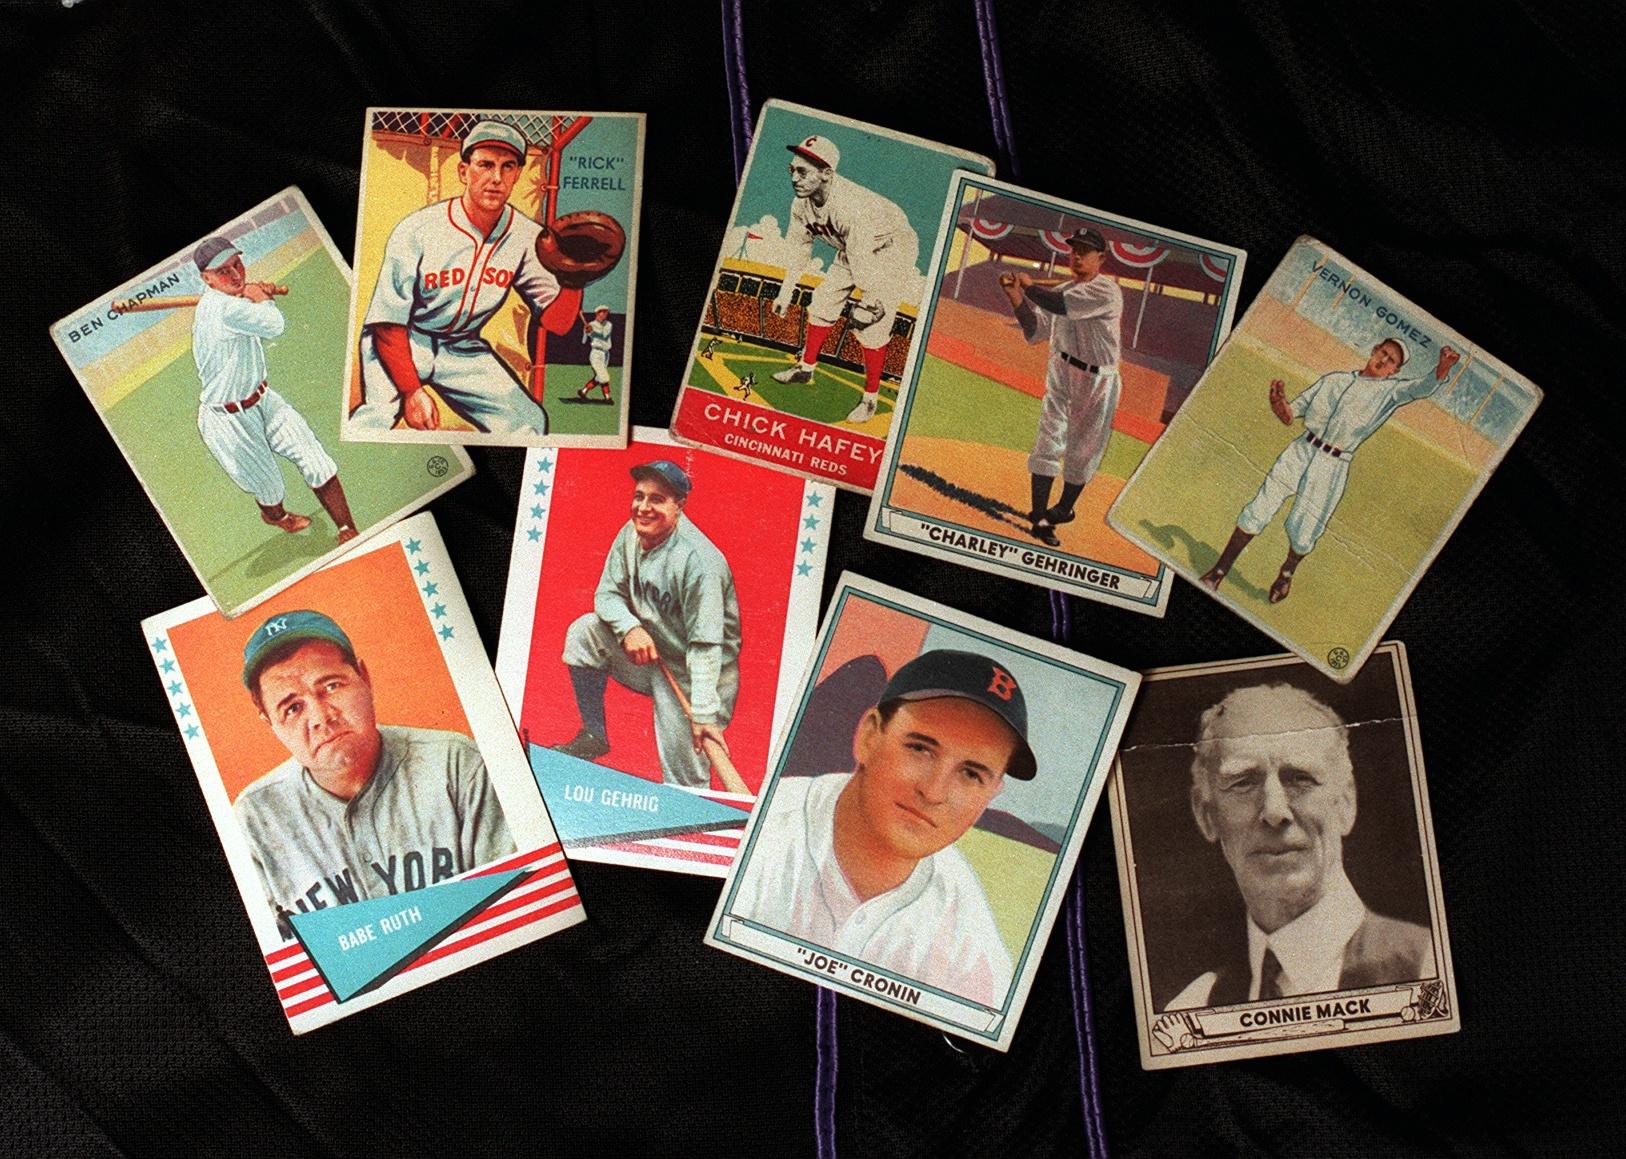 A display of collectible baseball cards